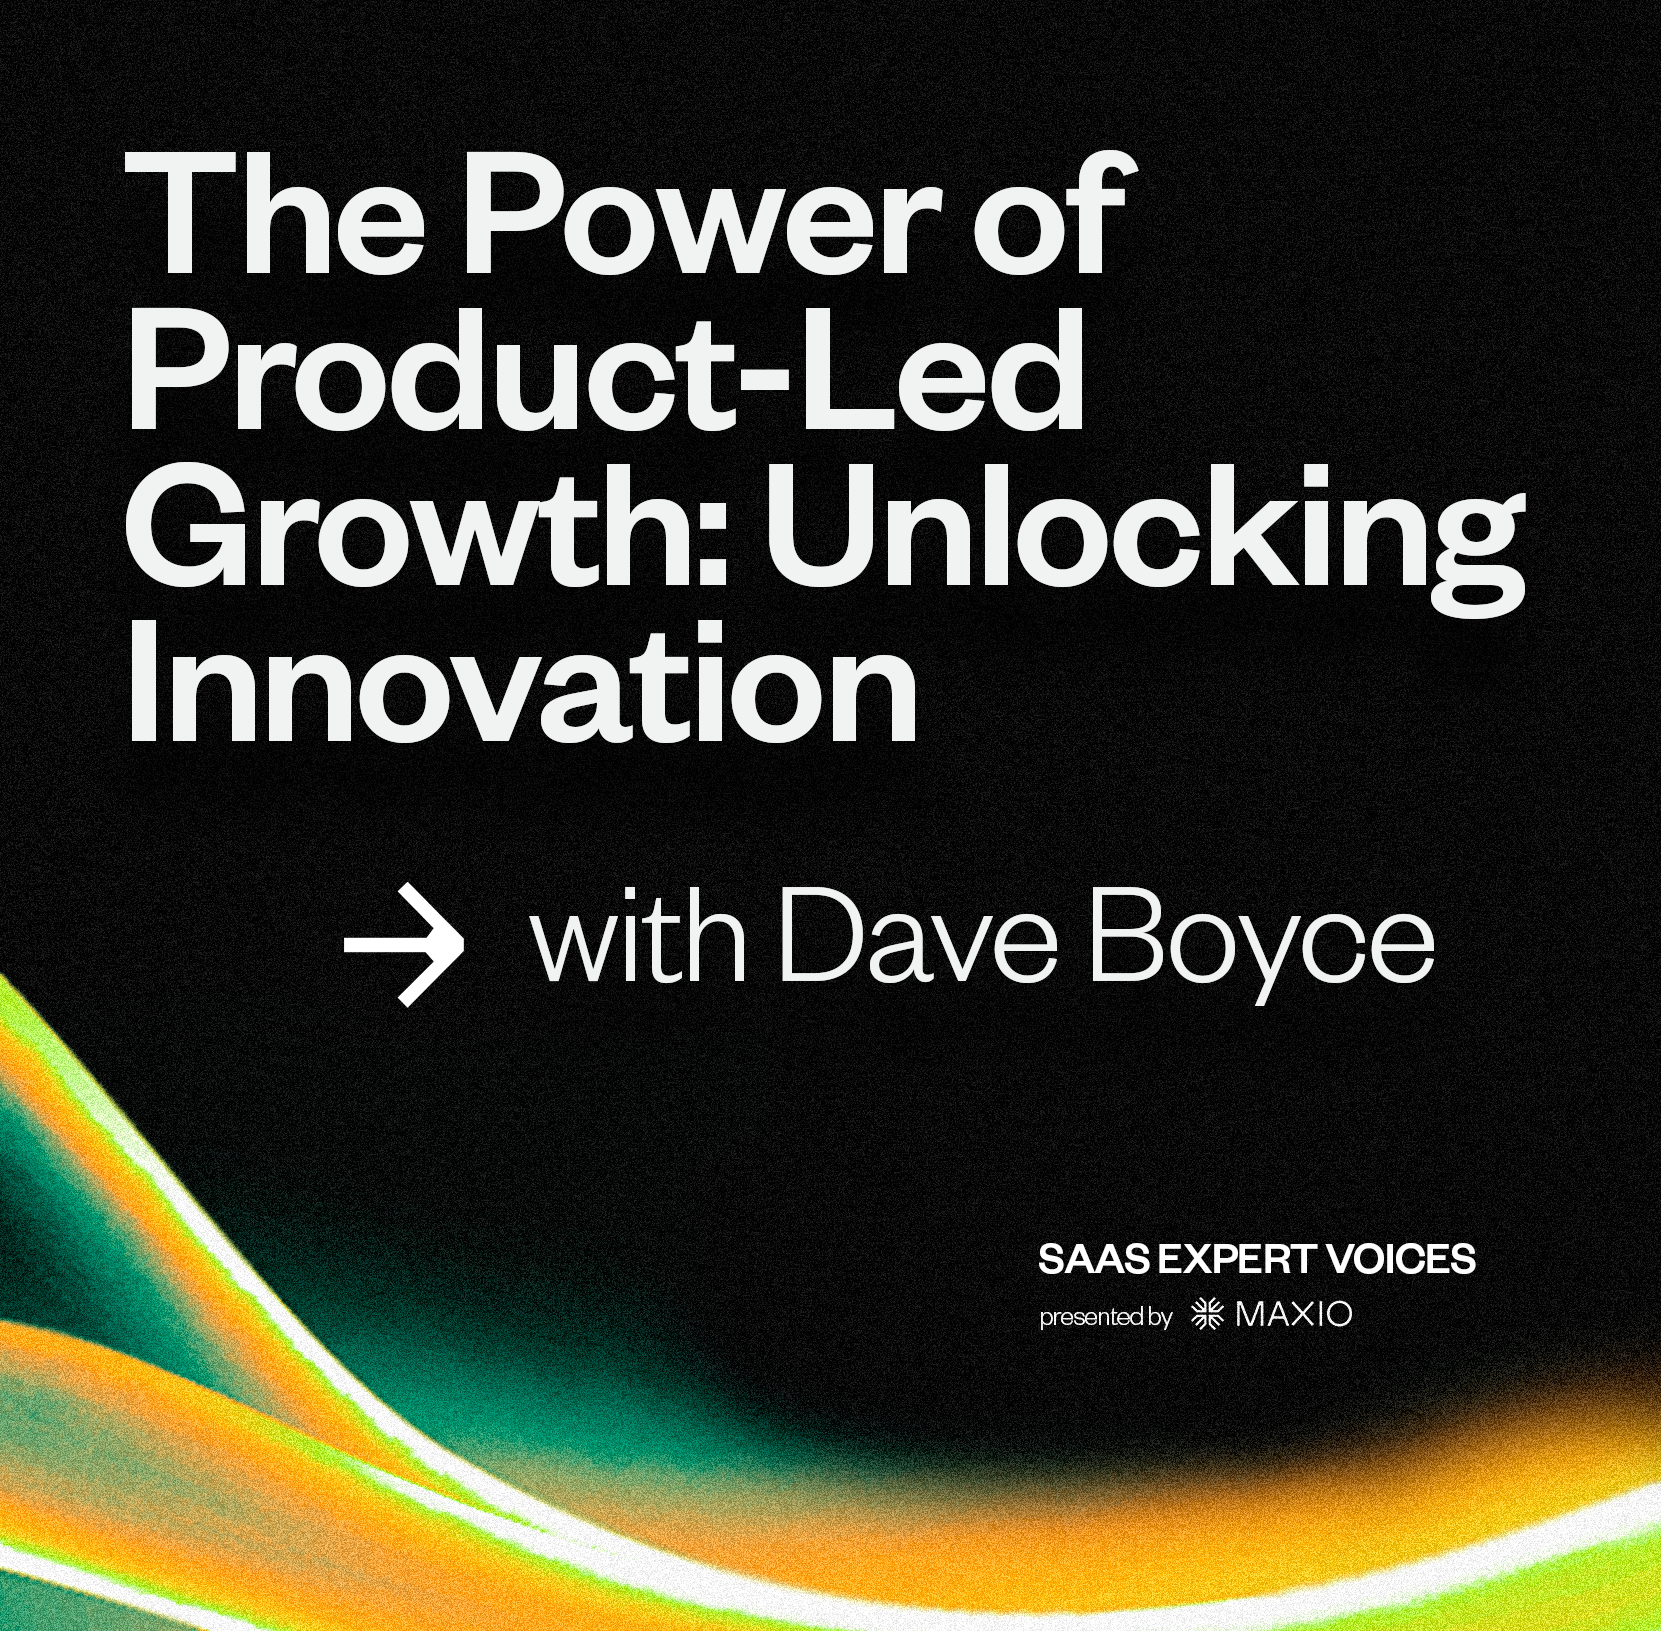 This week on the Expert Voices podcast, Randy Wootton, CEO of Maxio, speaks with Dave Boyce, Executive Chairman, Winning by Design. Dave shares his unique approach to career decisions, focusing on his need for challenging work that ensures personal growth and impact. This approach has shaped his strategies for businesses to adopt a customer-centric mindset that aligns the product with the user's core needs, creating a successful PLG strategy. Dave and Randy discuss the framework required for a PLG model, identifying the mindset, talent, and timeline necessary for successful adoption, and how go-to-market strategies differ and can coexist in today’s business environment.